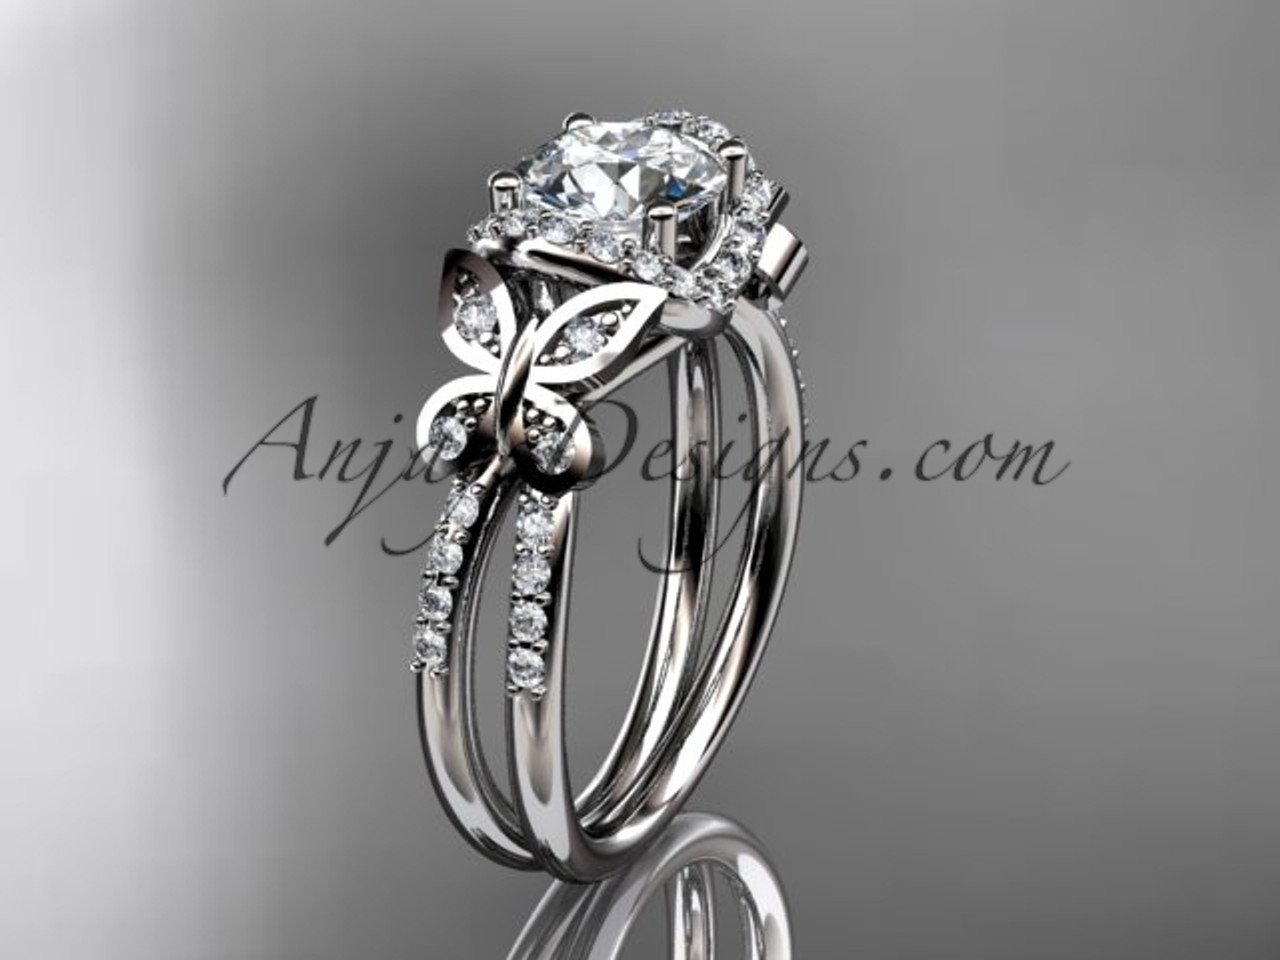 14kt white gold diamond butterfly wedding ring engagement ring ADLR141